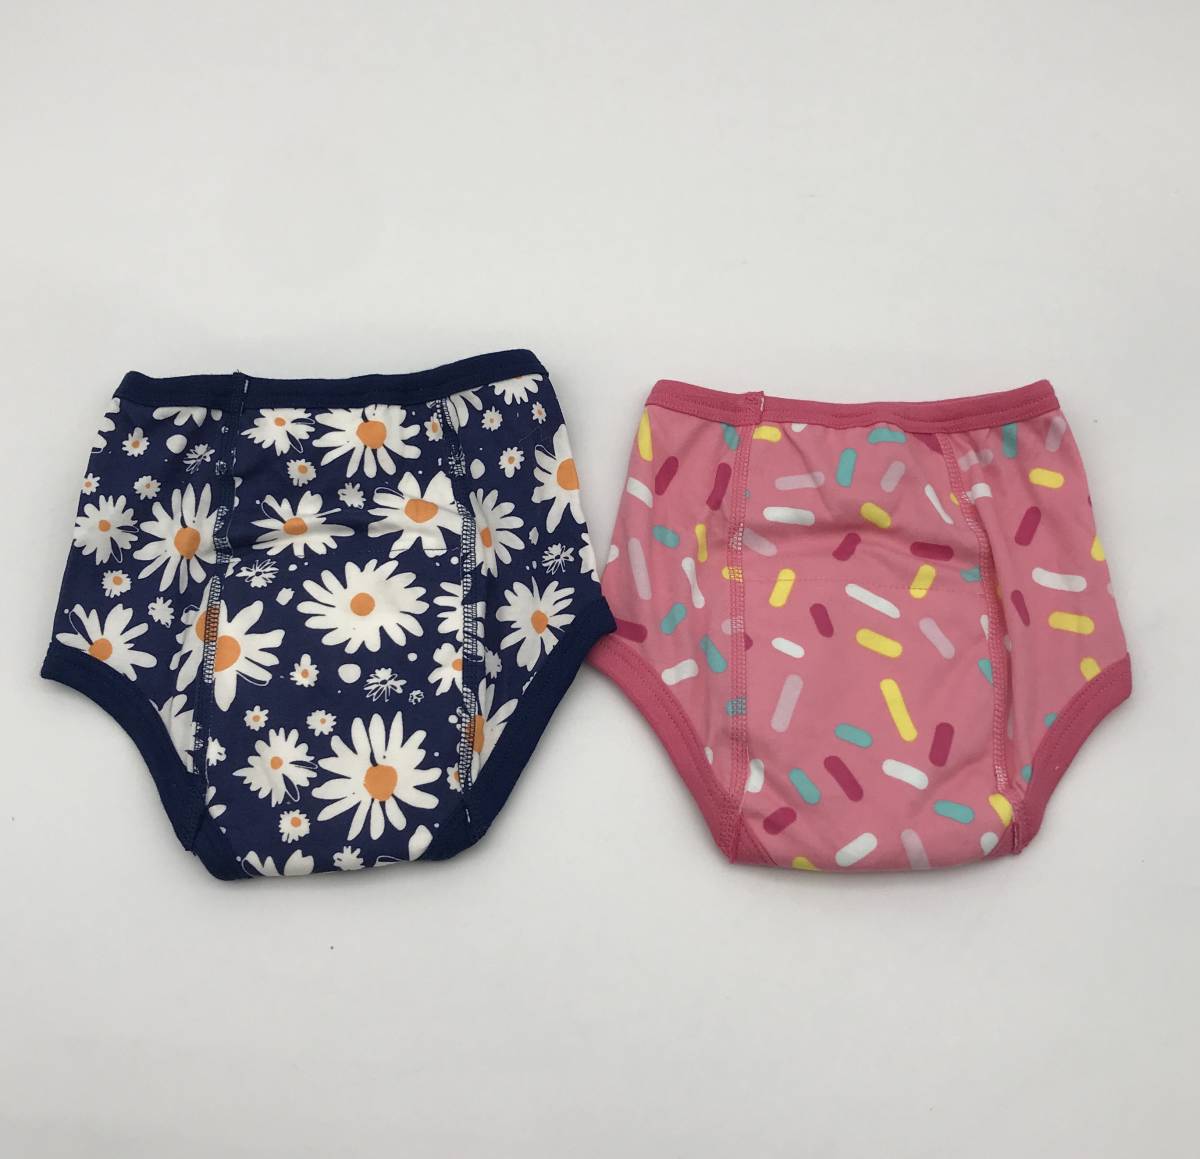 #54_0054 [MooMoo Baby] training pants 8 sheets set cotton 6 layer child toilet unisex baby 4T(110) 8 pattern floral print star Heart 